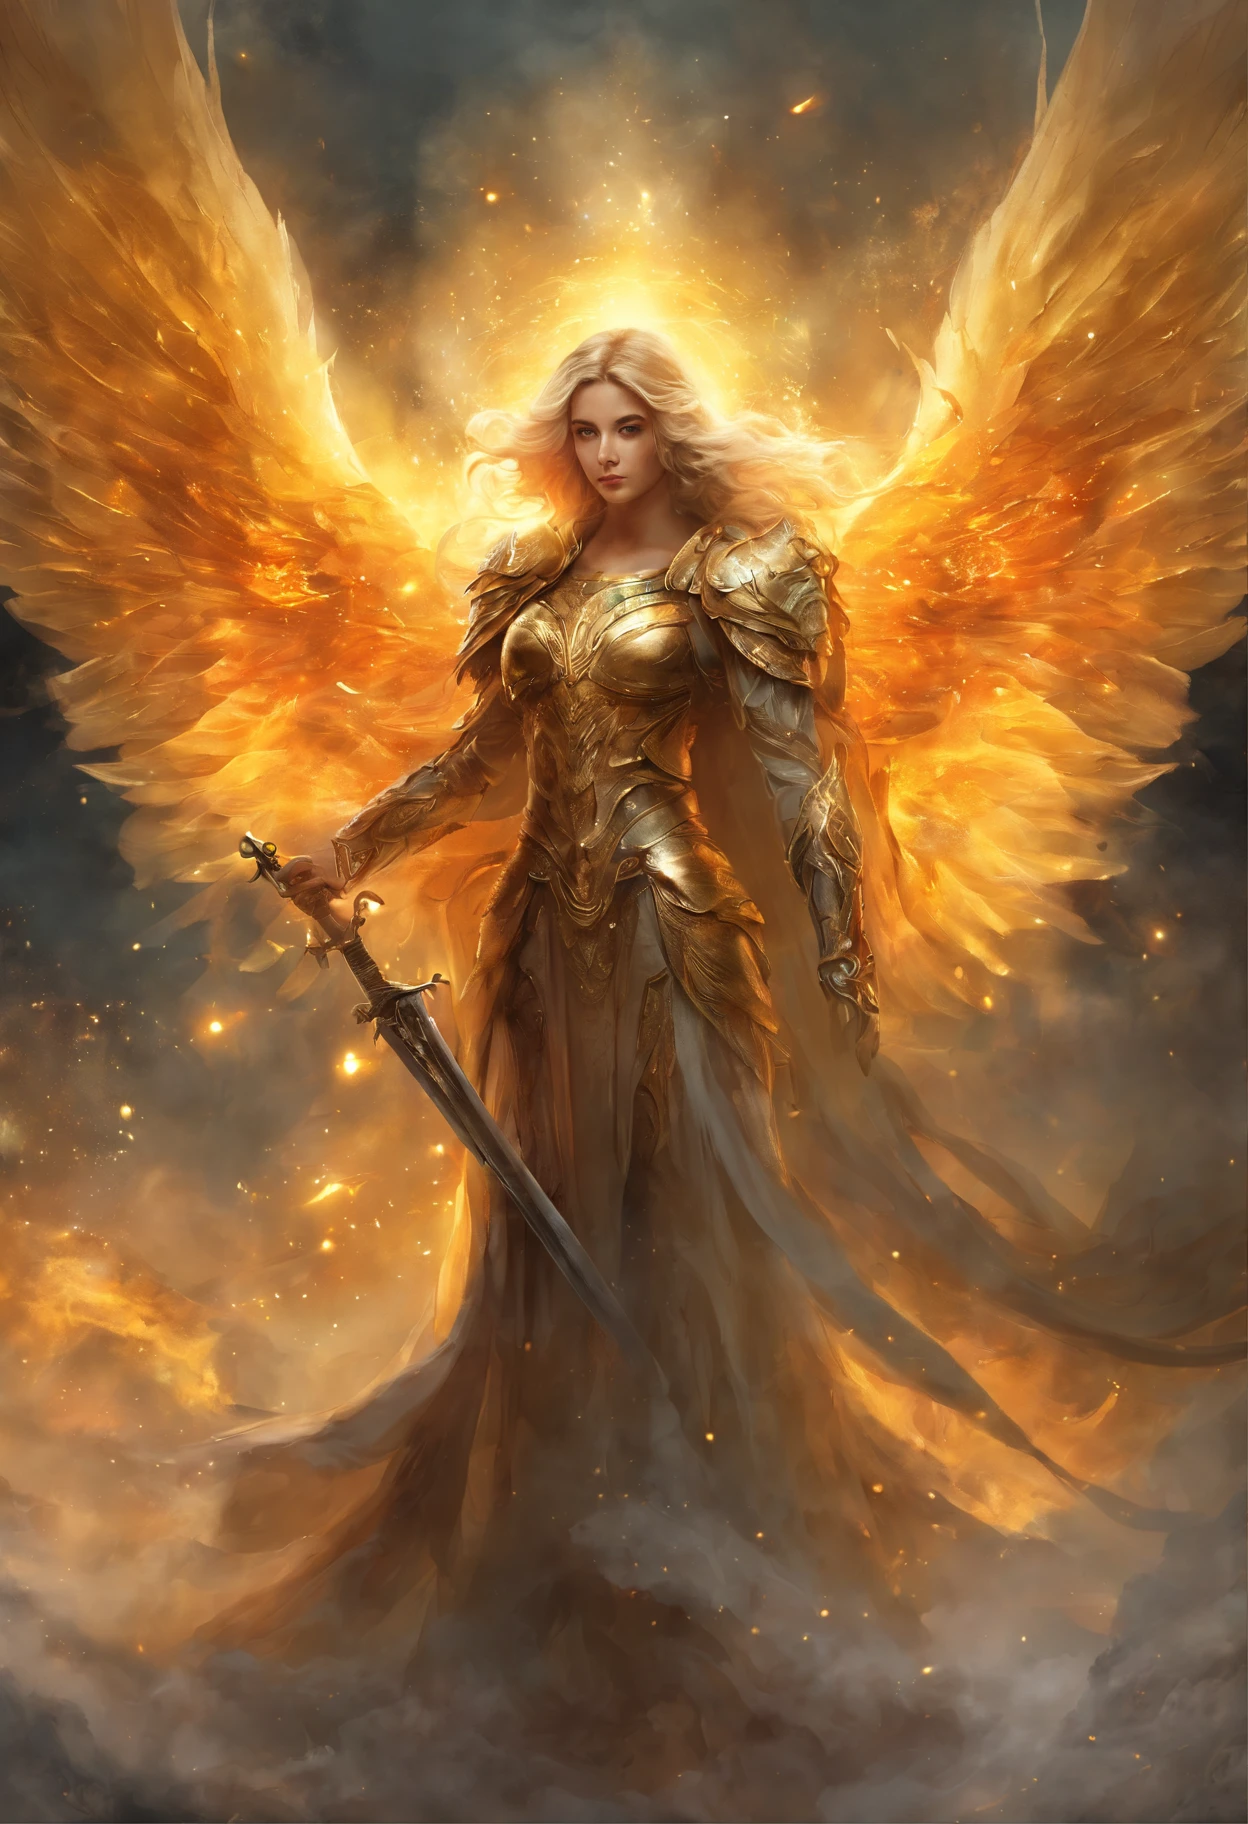 Ultra-realistic angelic figure: A golden angel with wings spread with a fiery sword in his hand in a gloomy, dark smoke setting